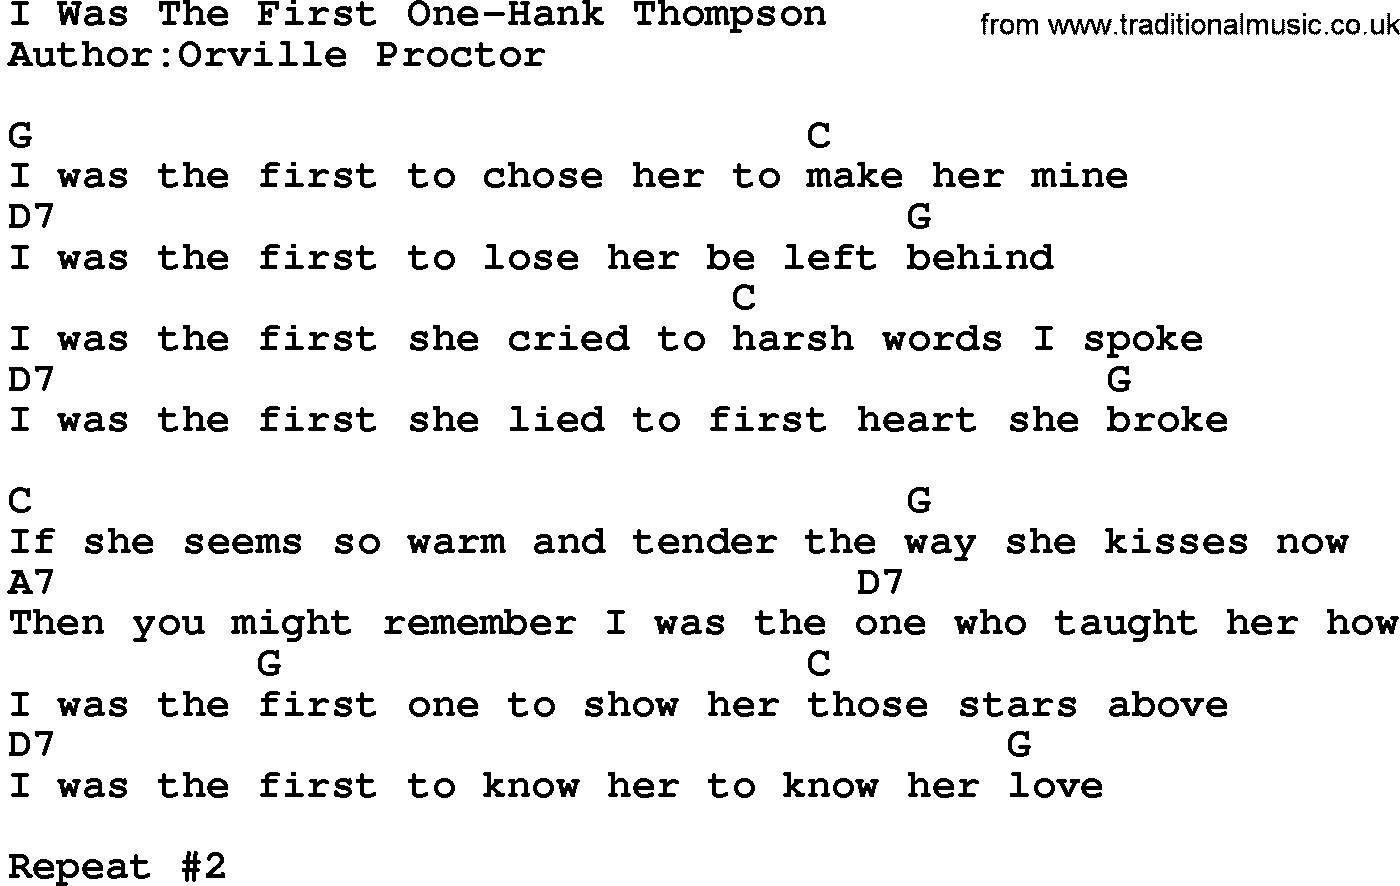 Country music song: I Was The First One-Hank Thompson lyrics and chords